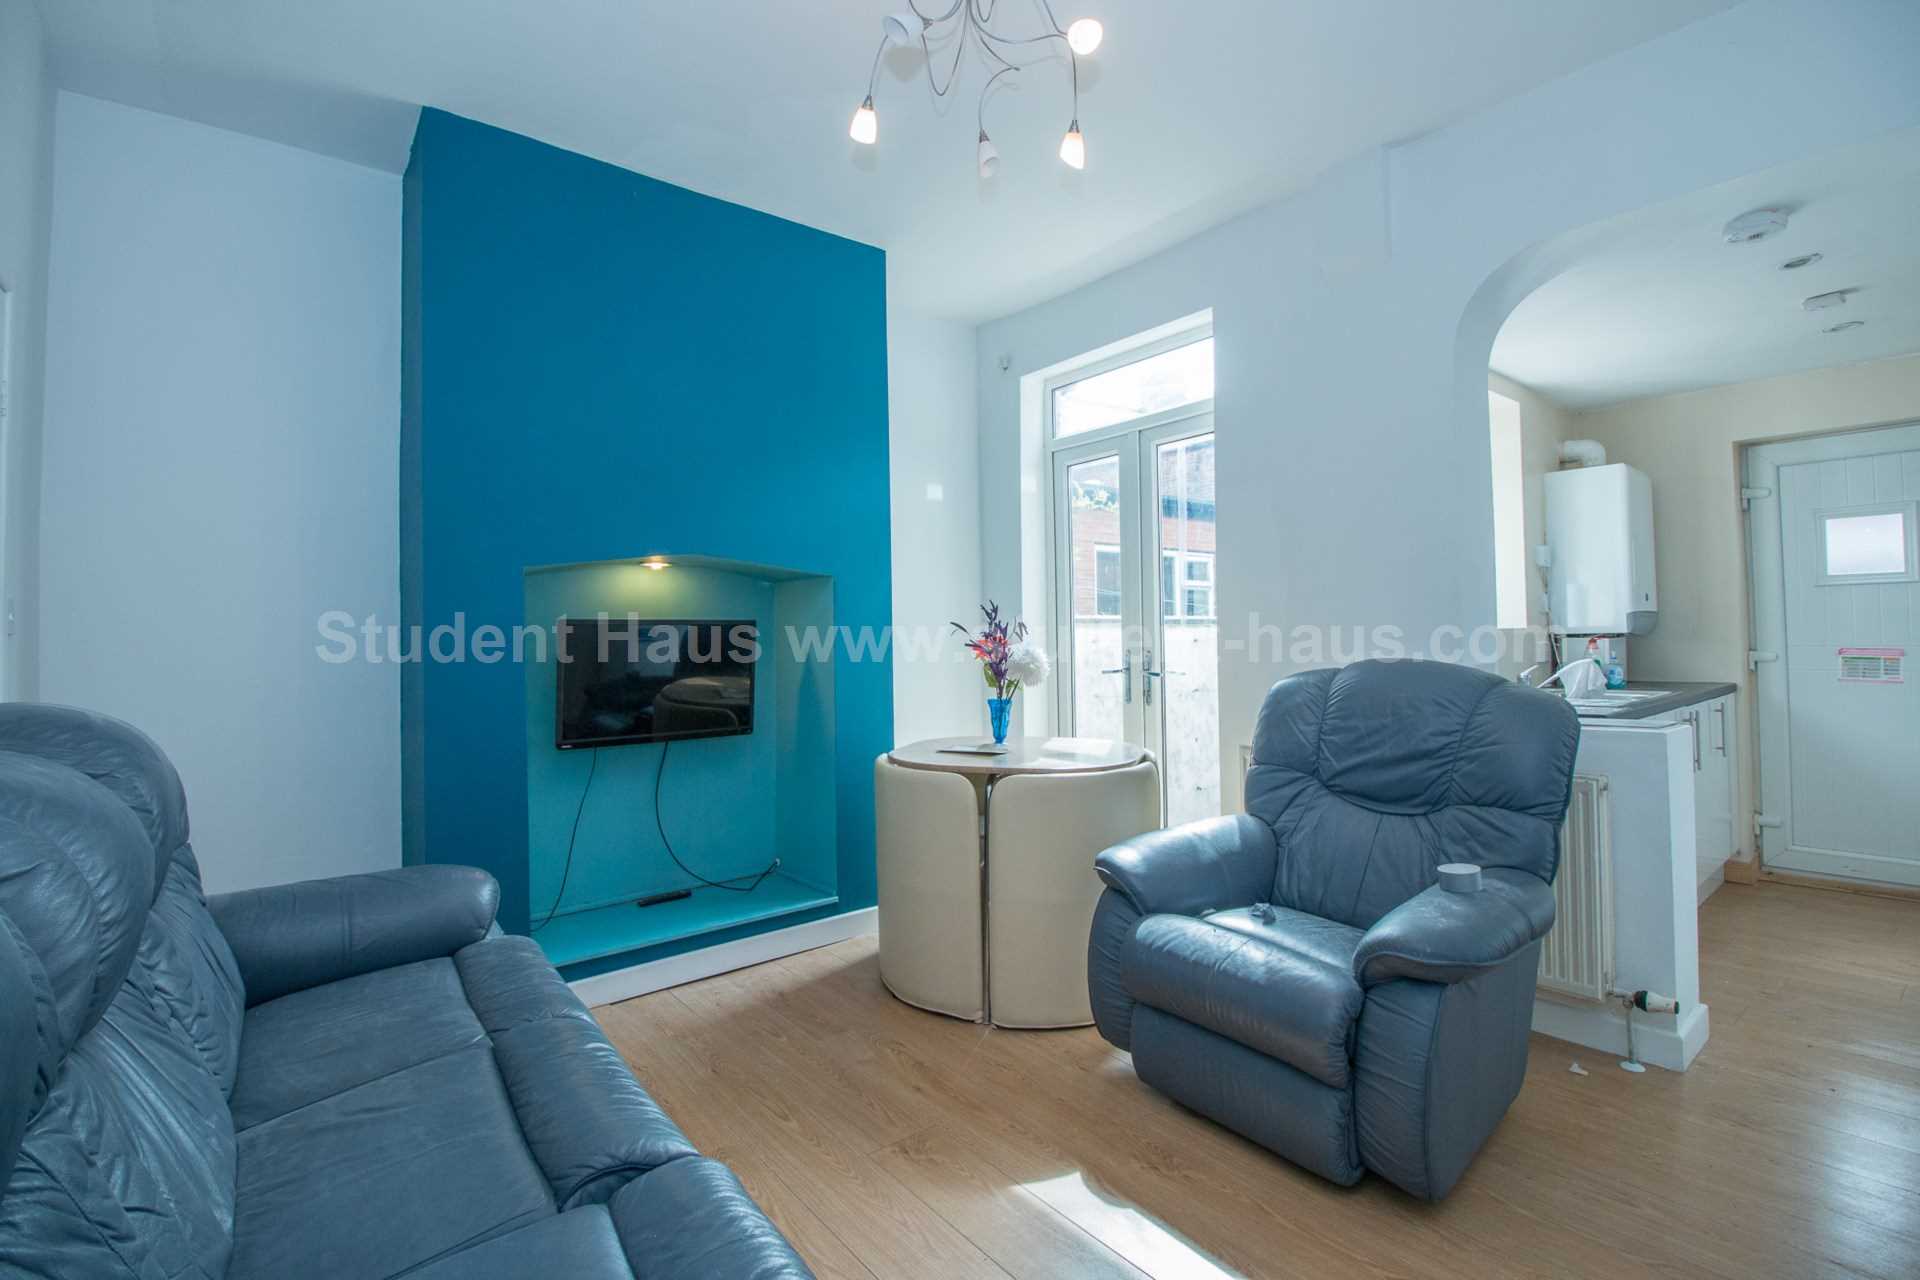 3 bed House (unspecified) for rent in Salford. From Student Haus